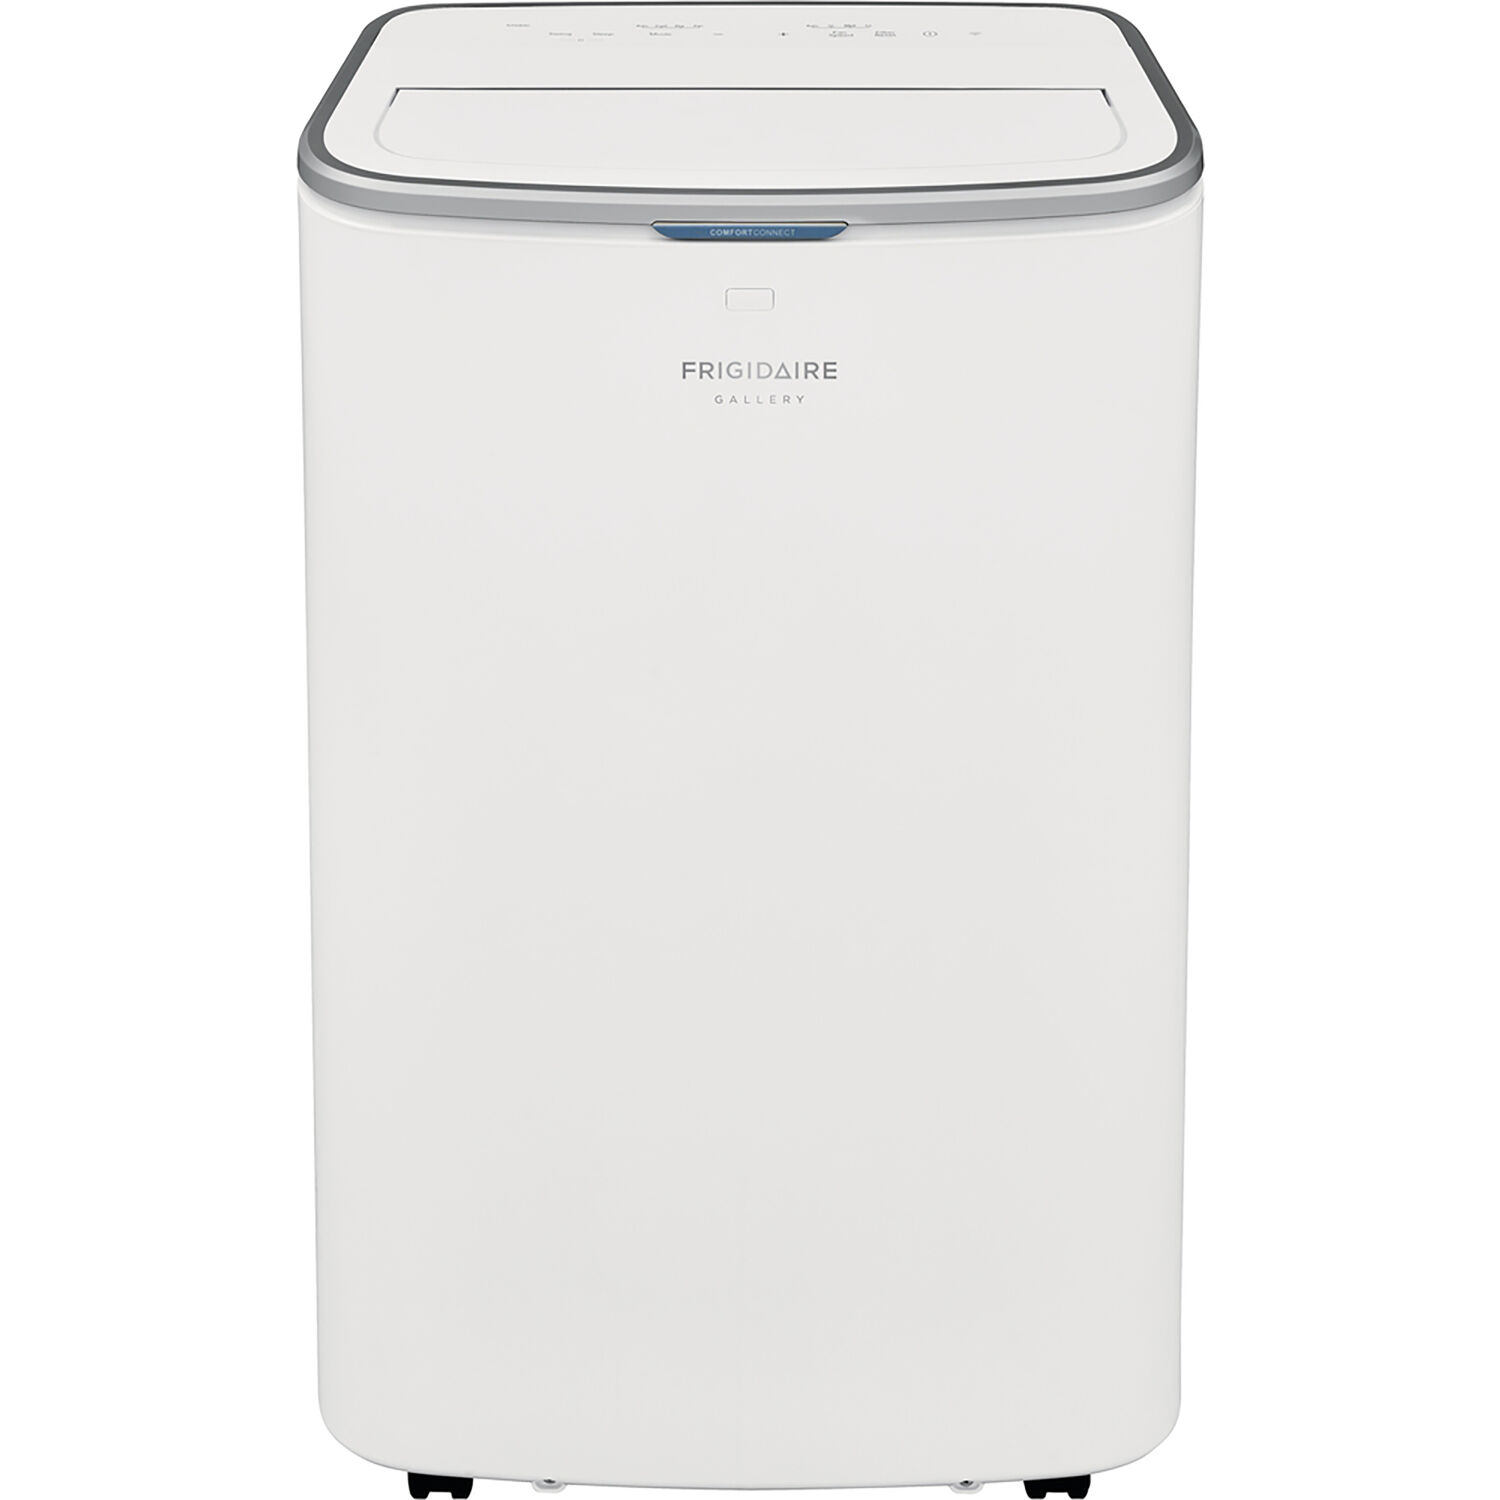 Frigidaire Cool Connect Smart Portable Air Conditioner with Wi-Fi Control for a Room up to 600-Sq. Ft. - image 1 of 14